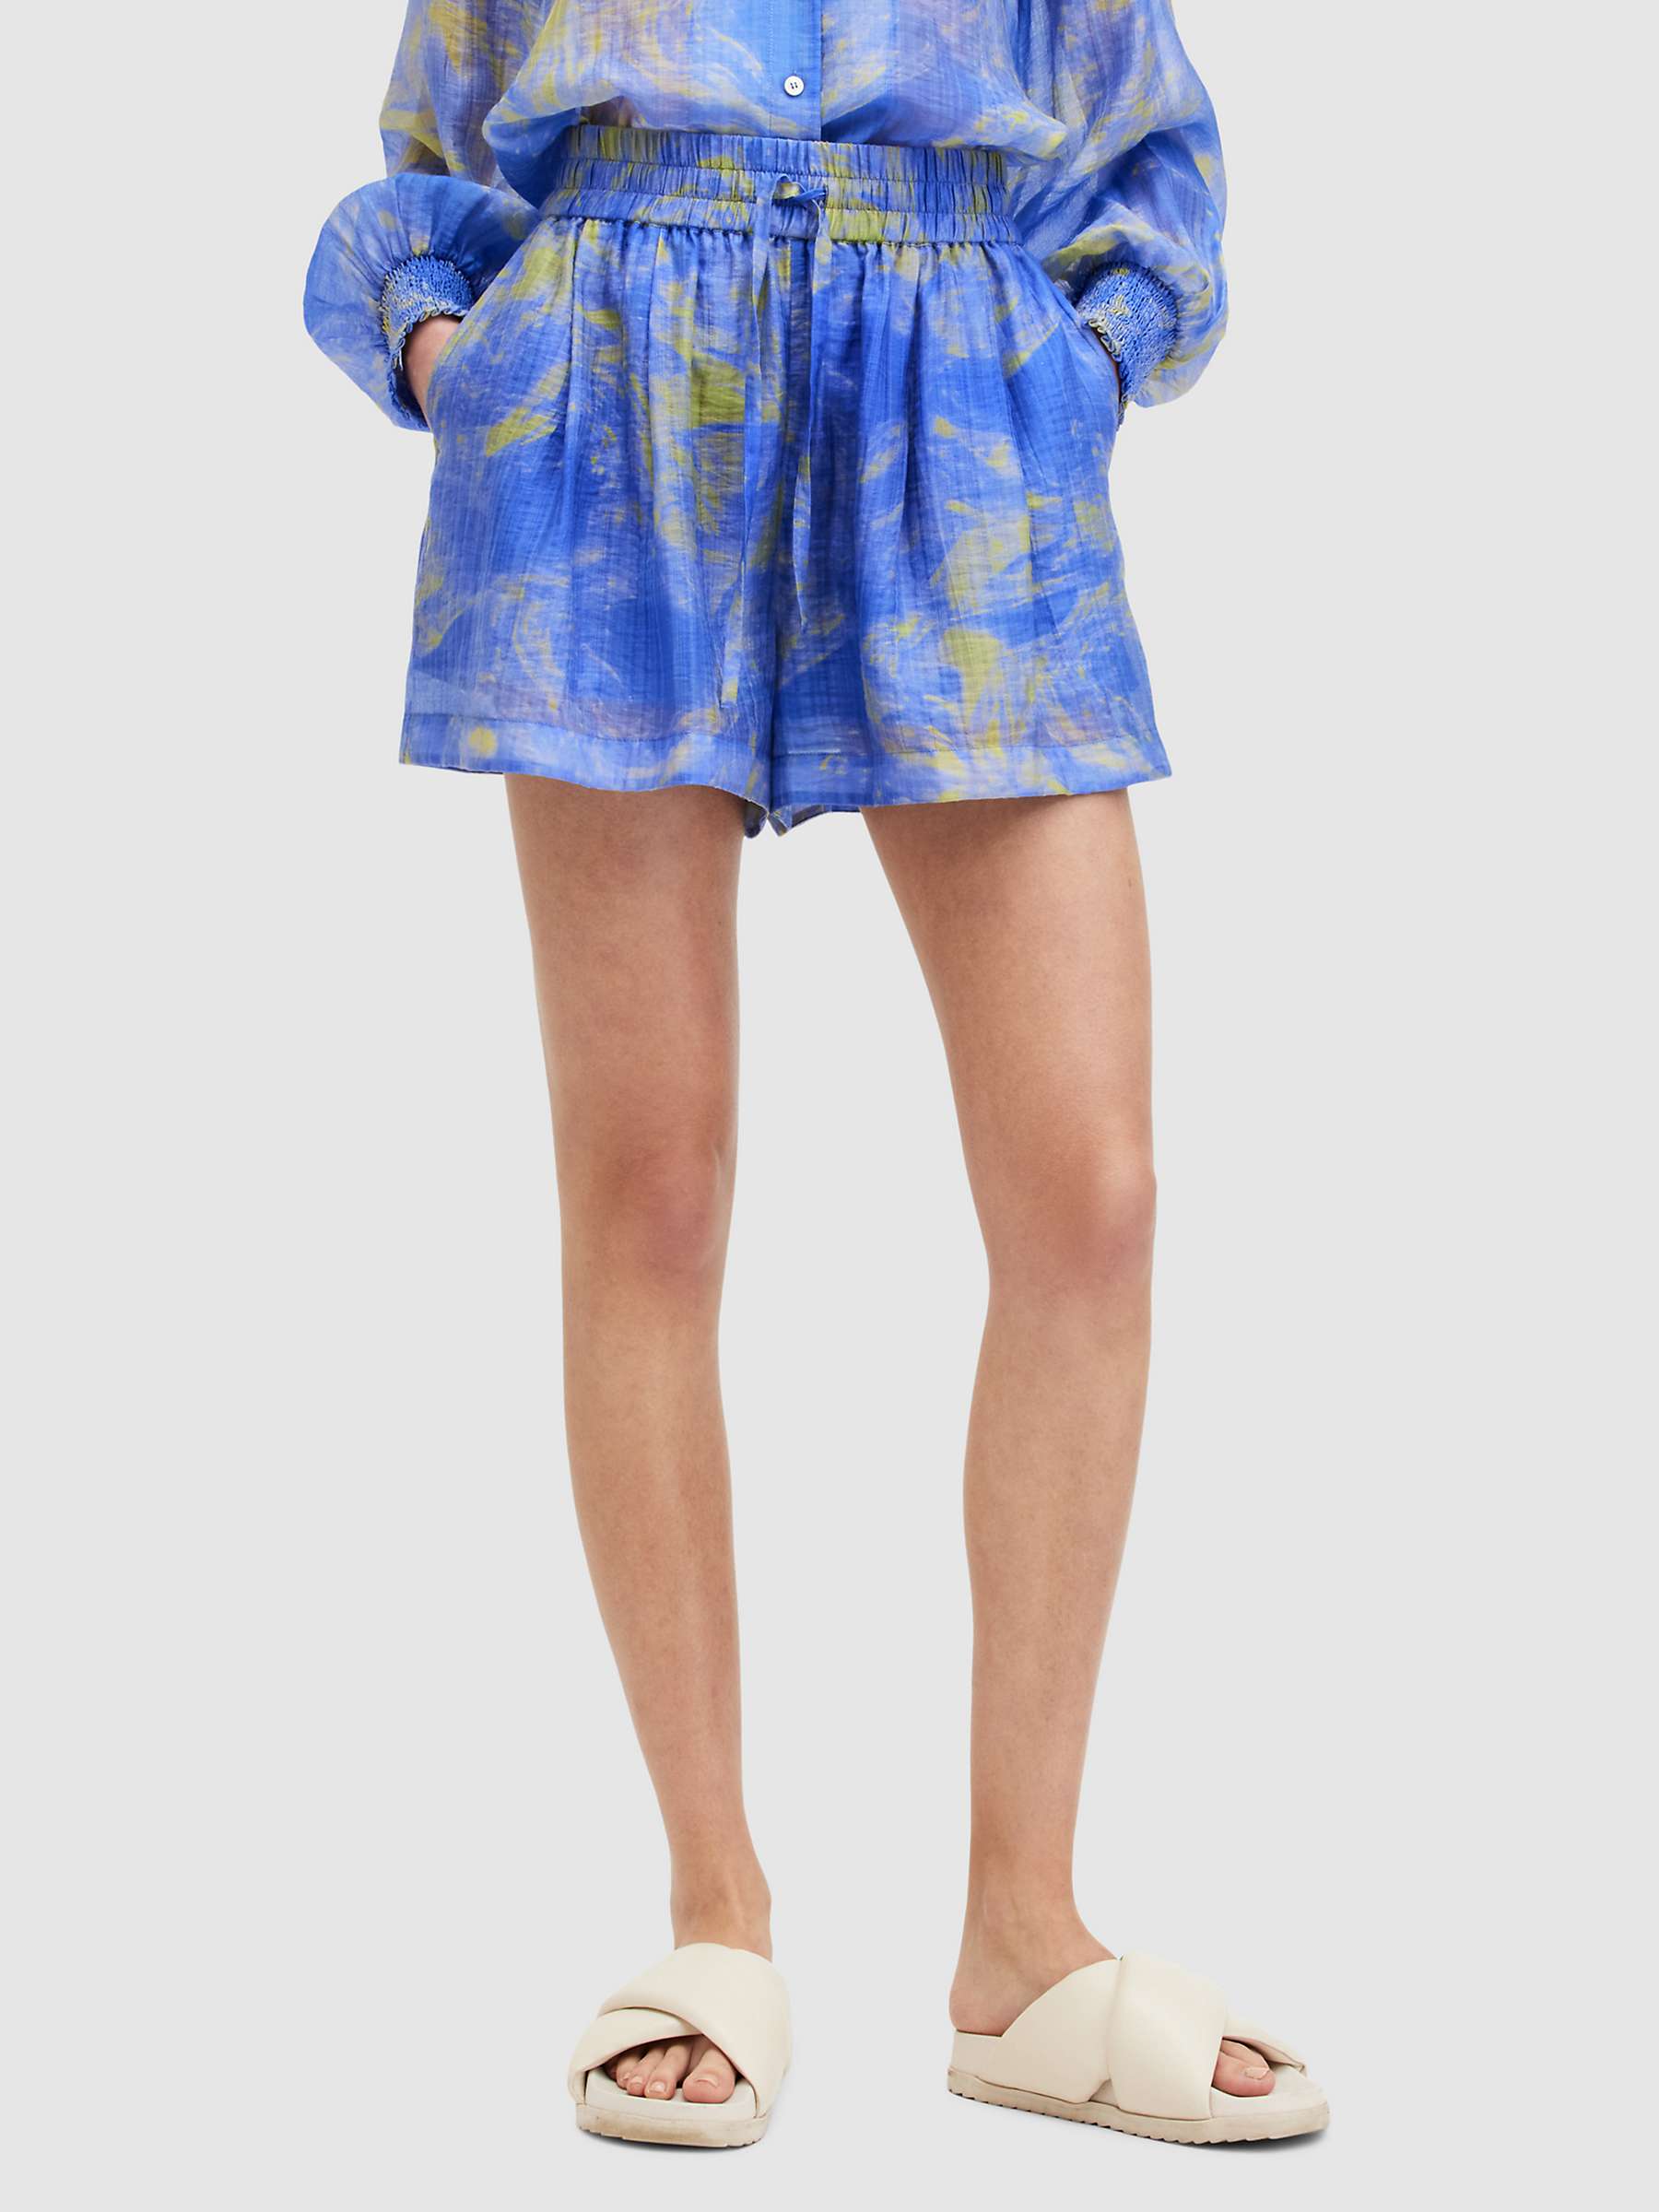 Buy AllSaints Isla Abstract Print Drawstring Shorts, Electric Blue/Multi Online at johnlewis.com